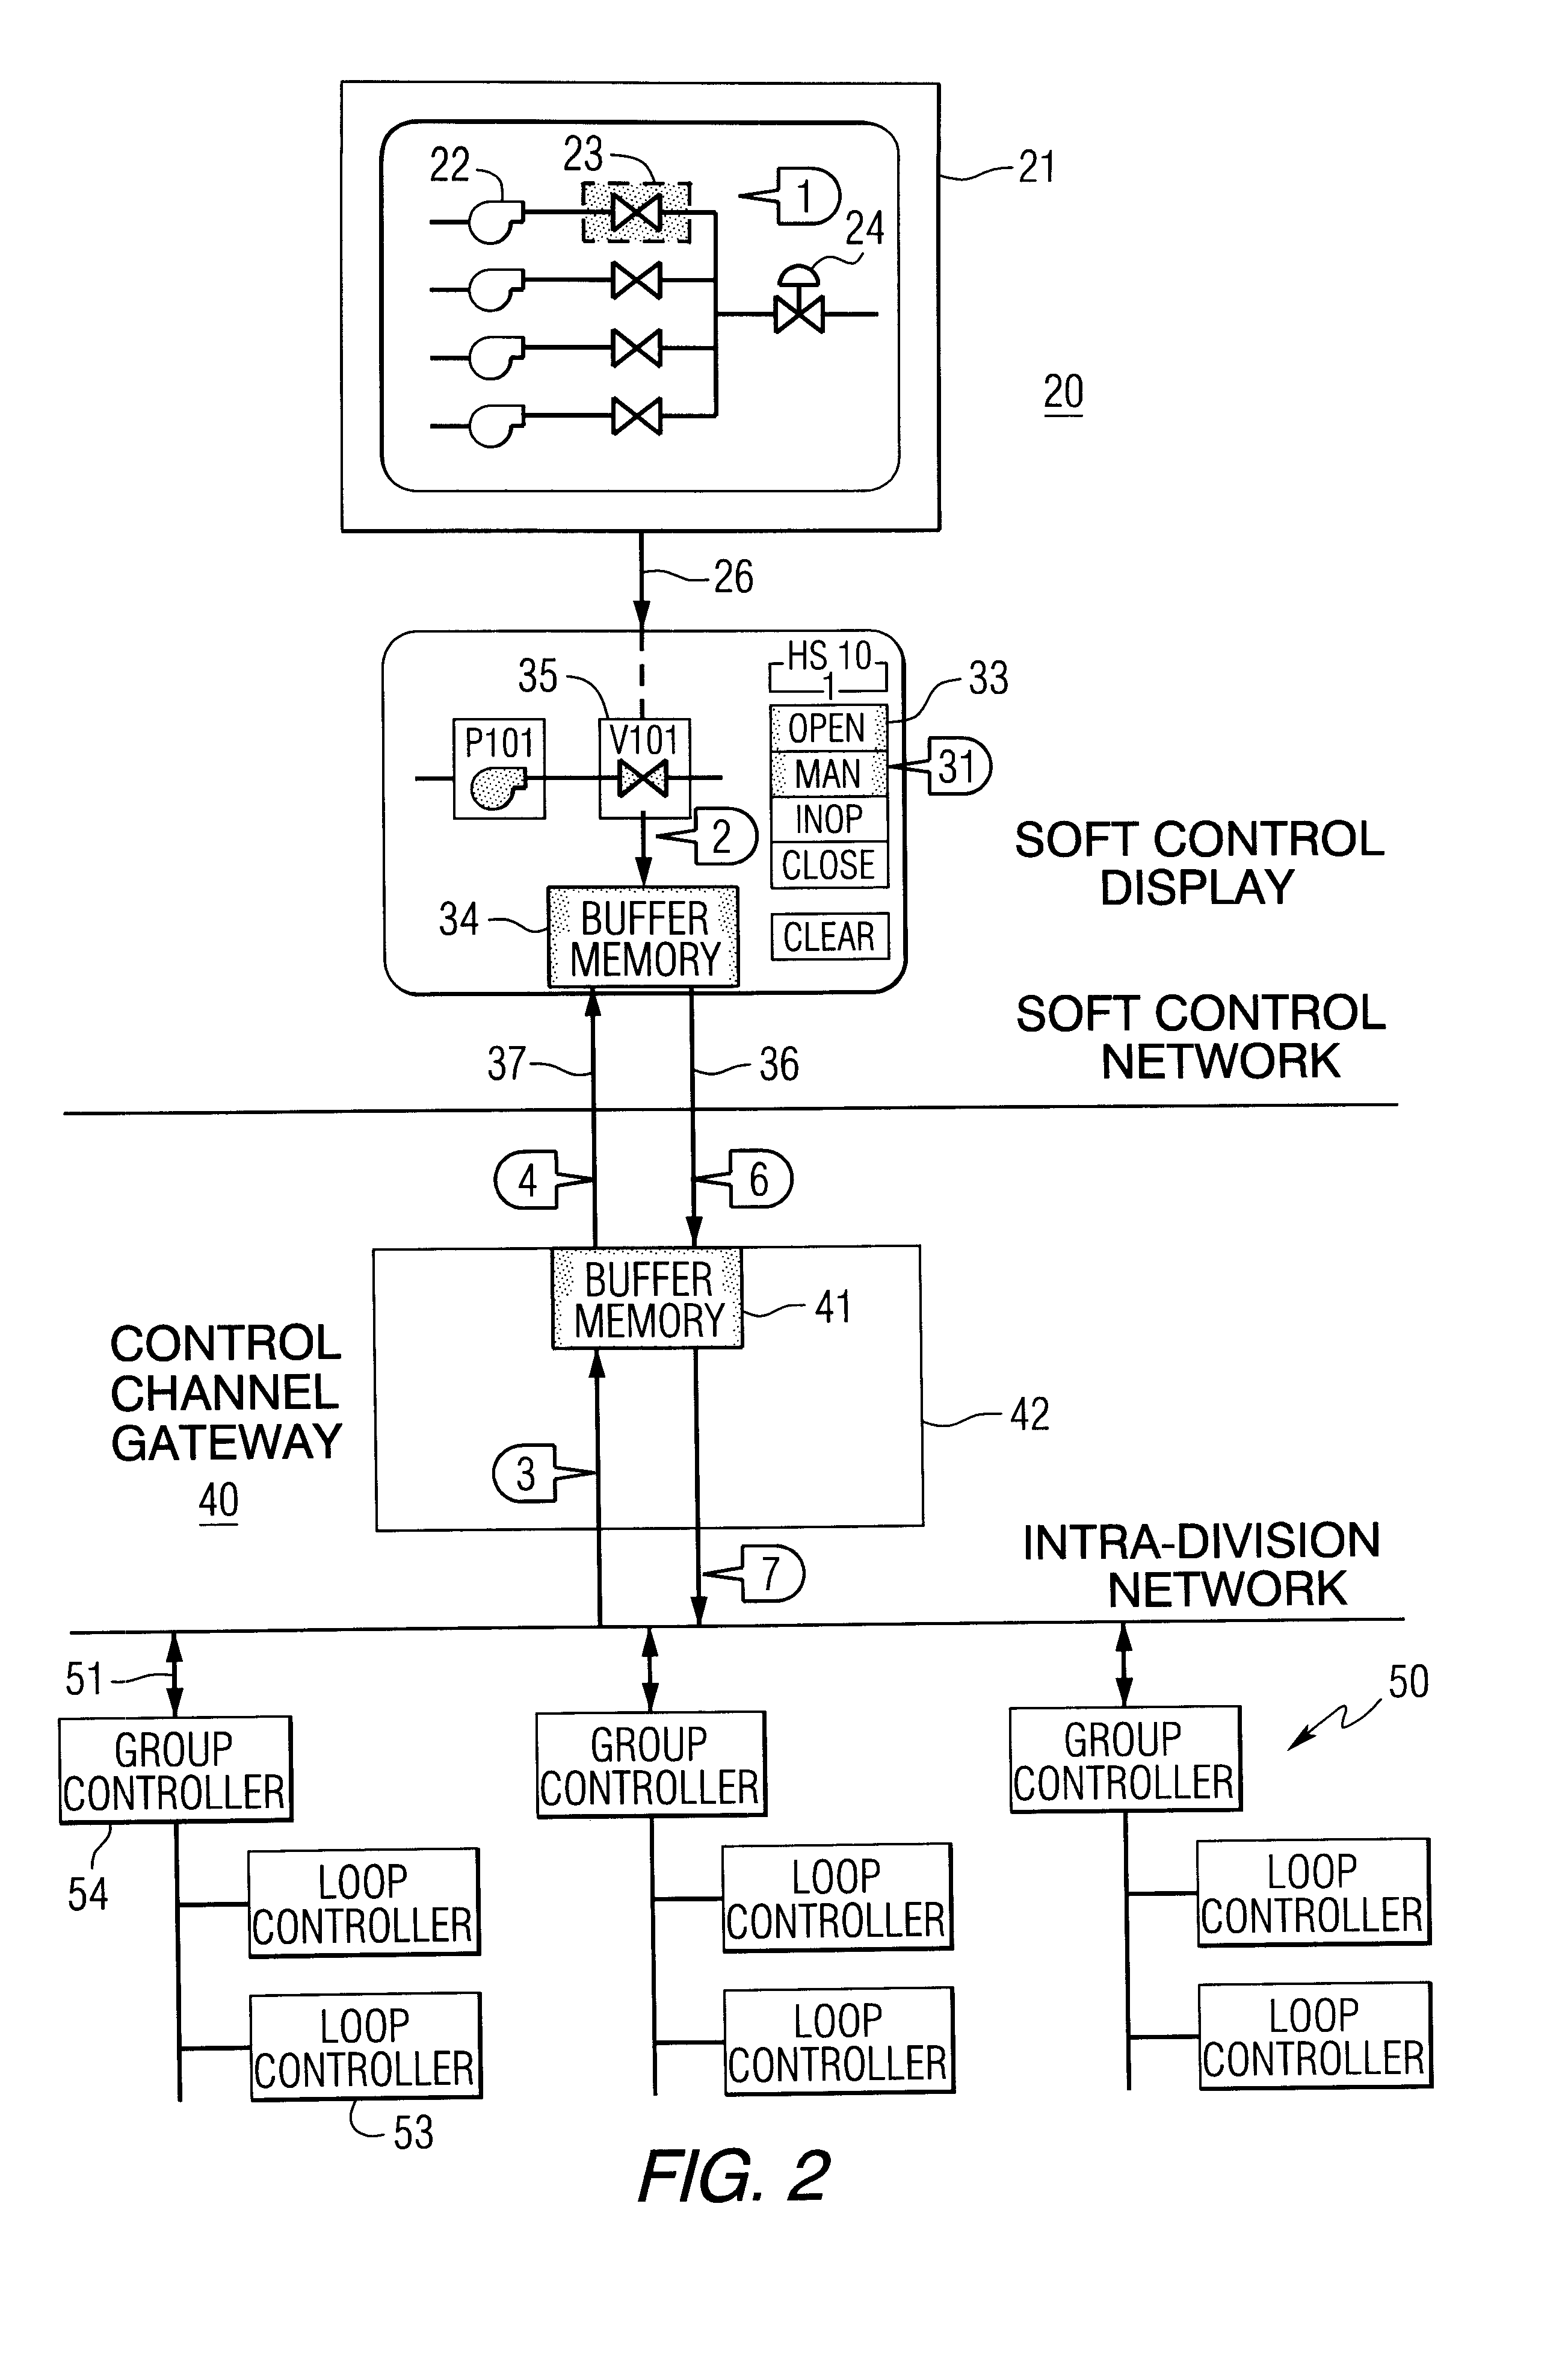 Method and apparatus to eliminate confirmation switches and channel demultiplexer from soft control man-machine interface (MMI)